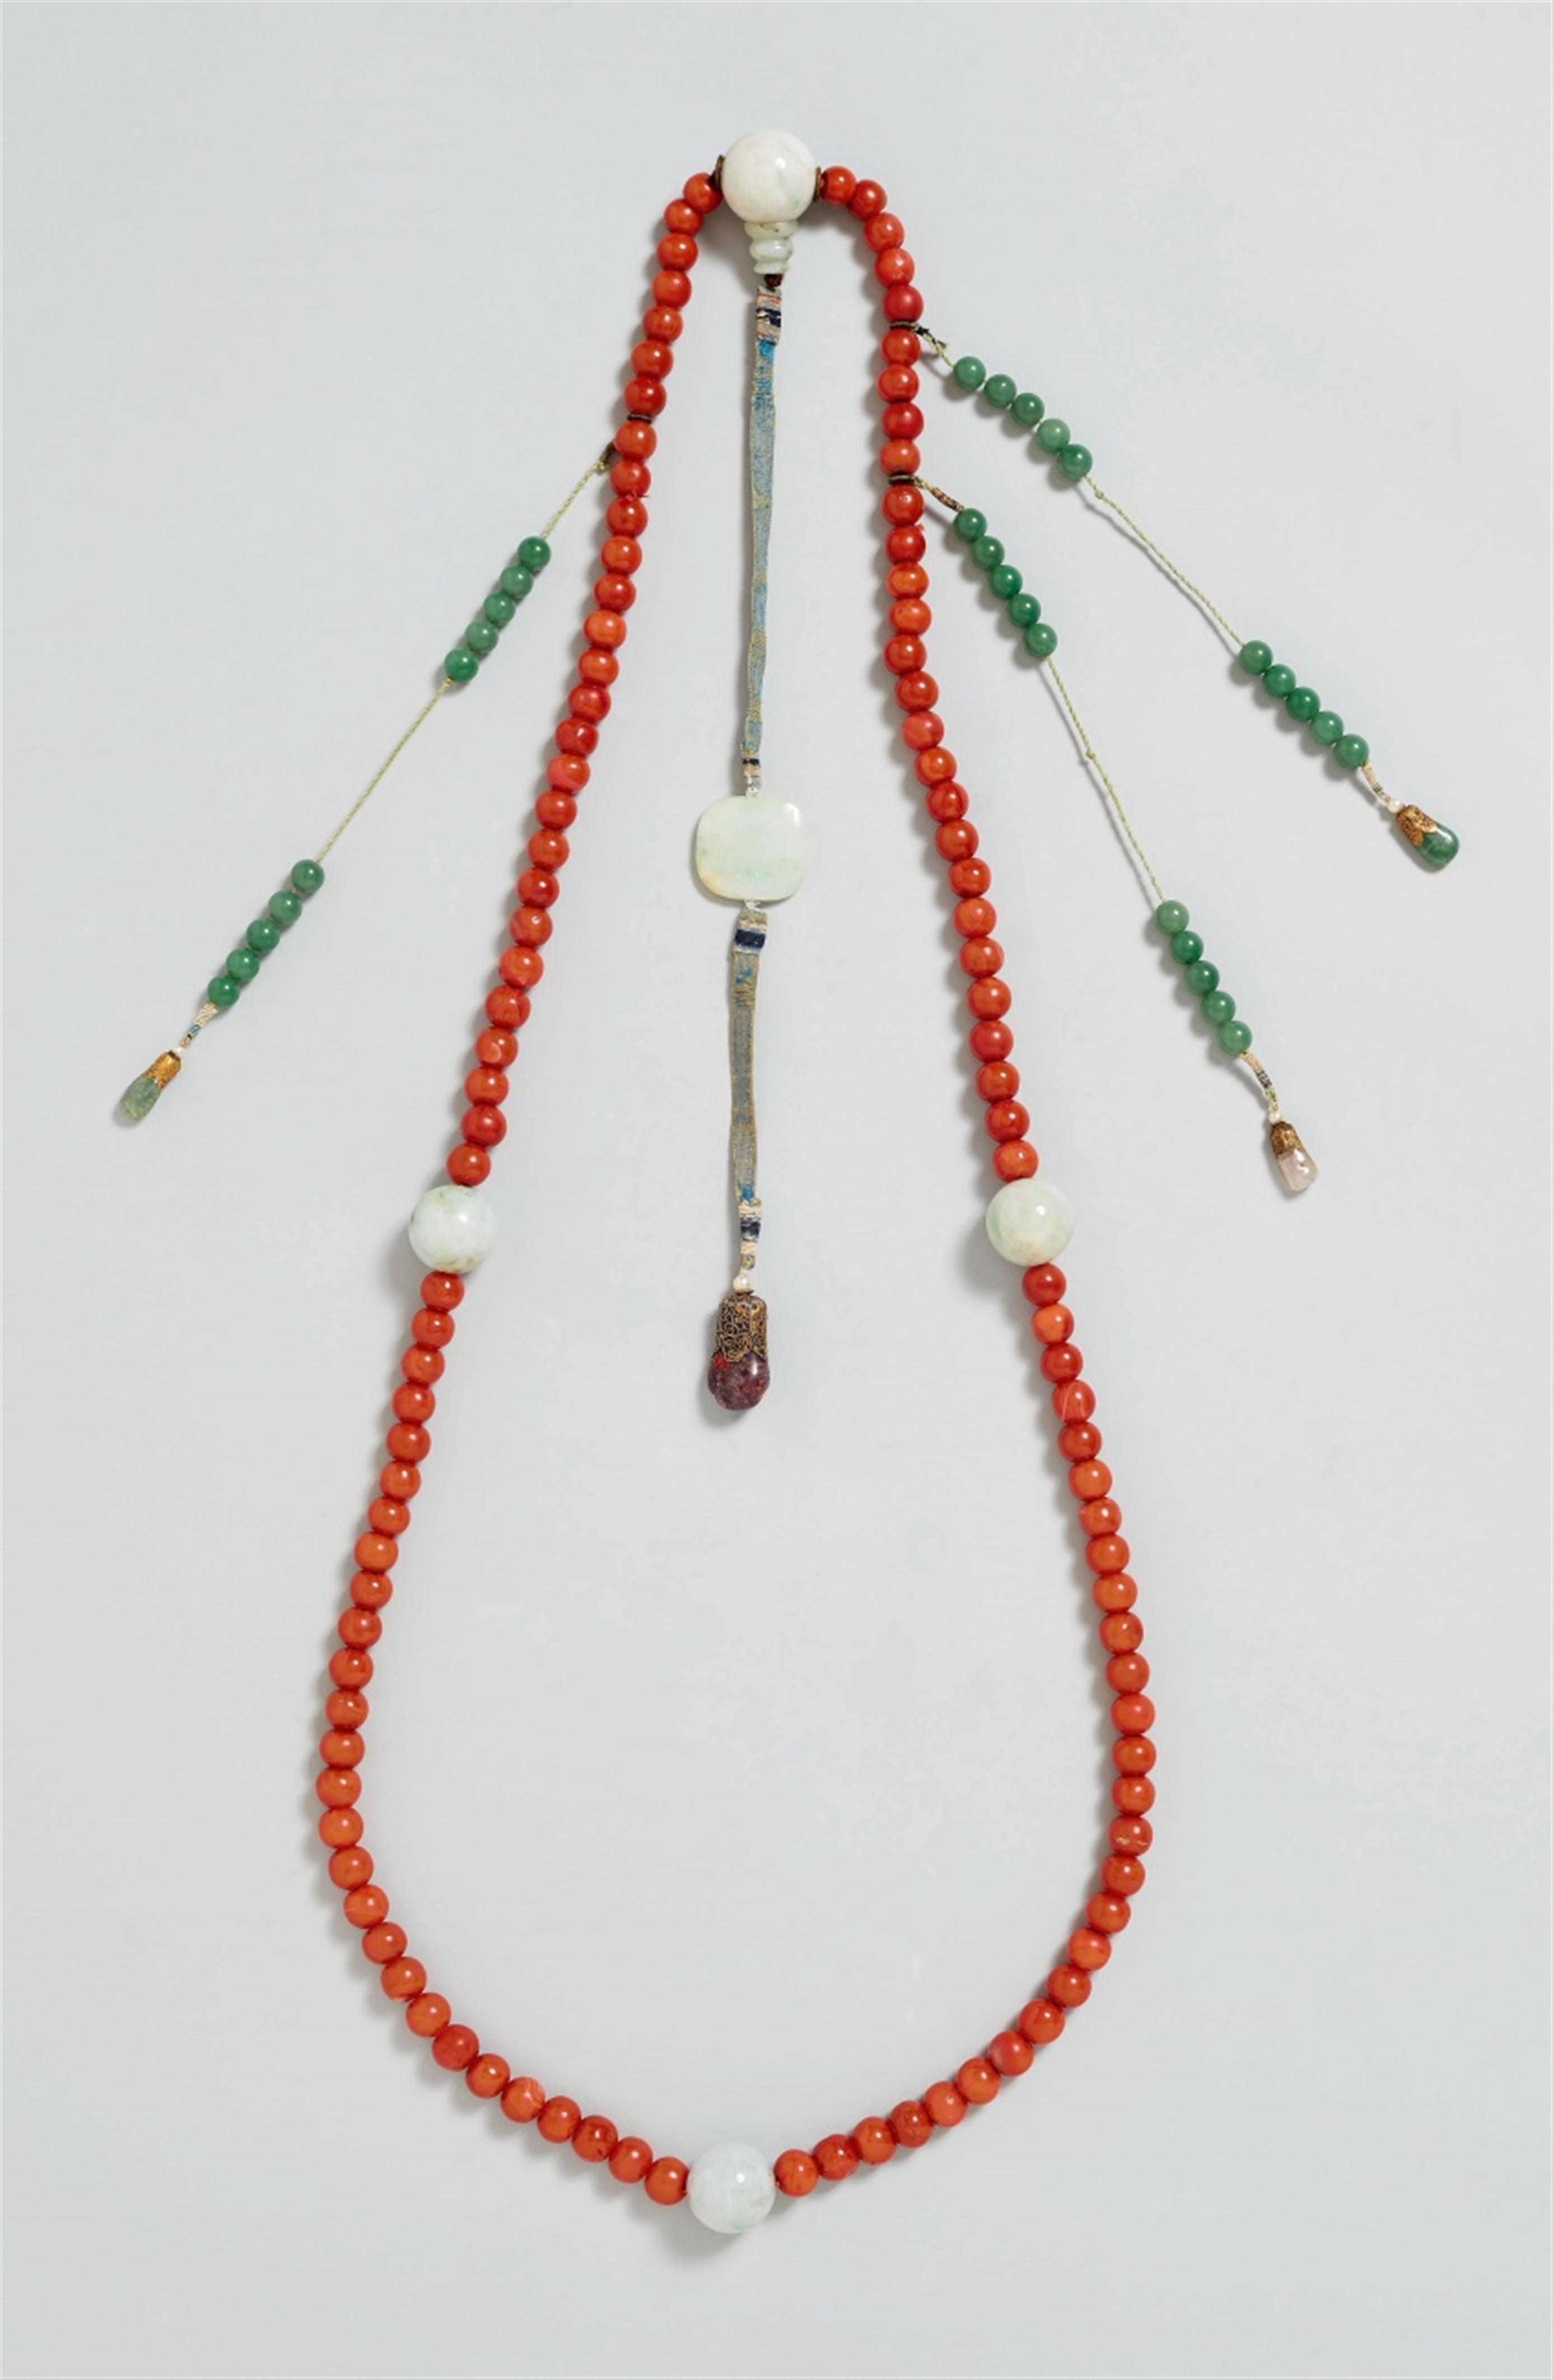 A long court necklace (chaozhu) consisting of 108 imitation coral glass beads. Early 20th century - image-1